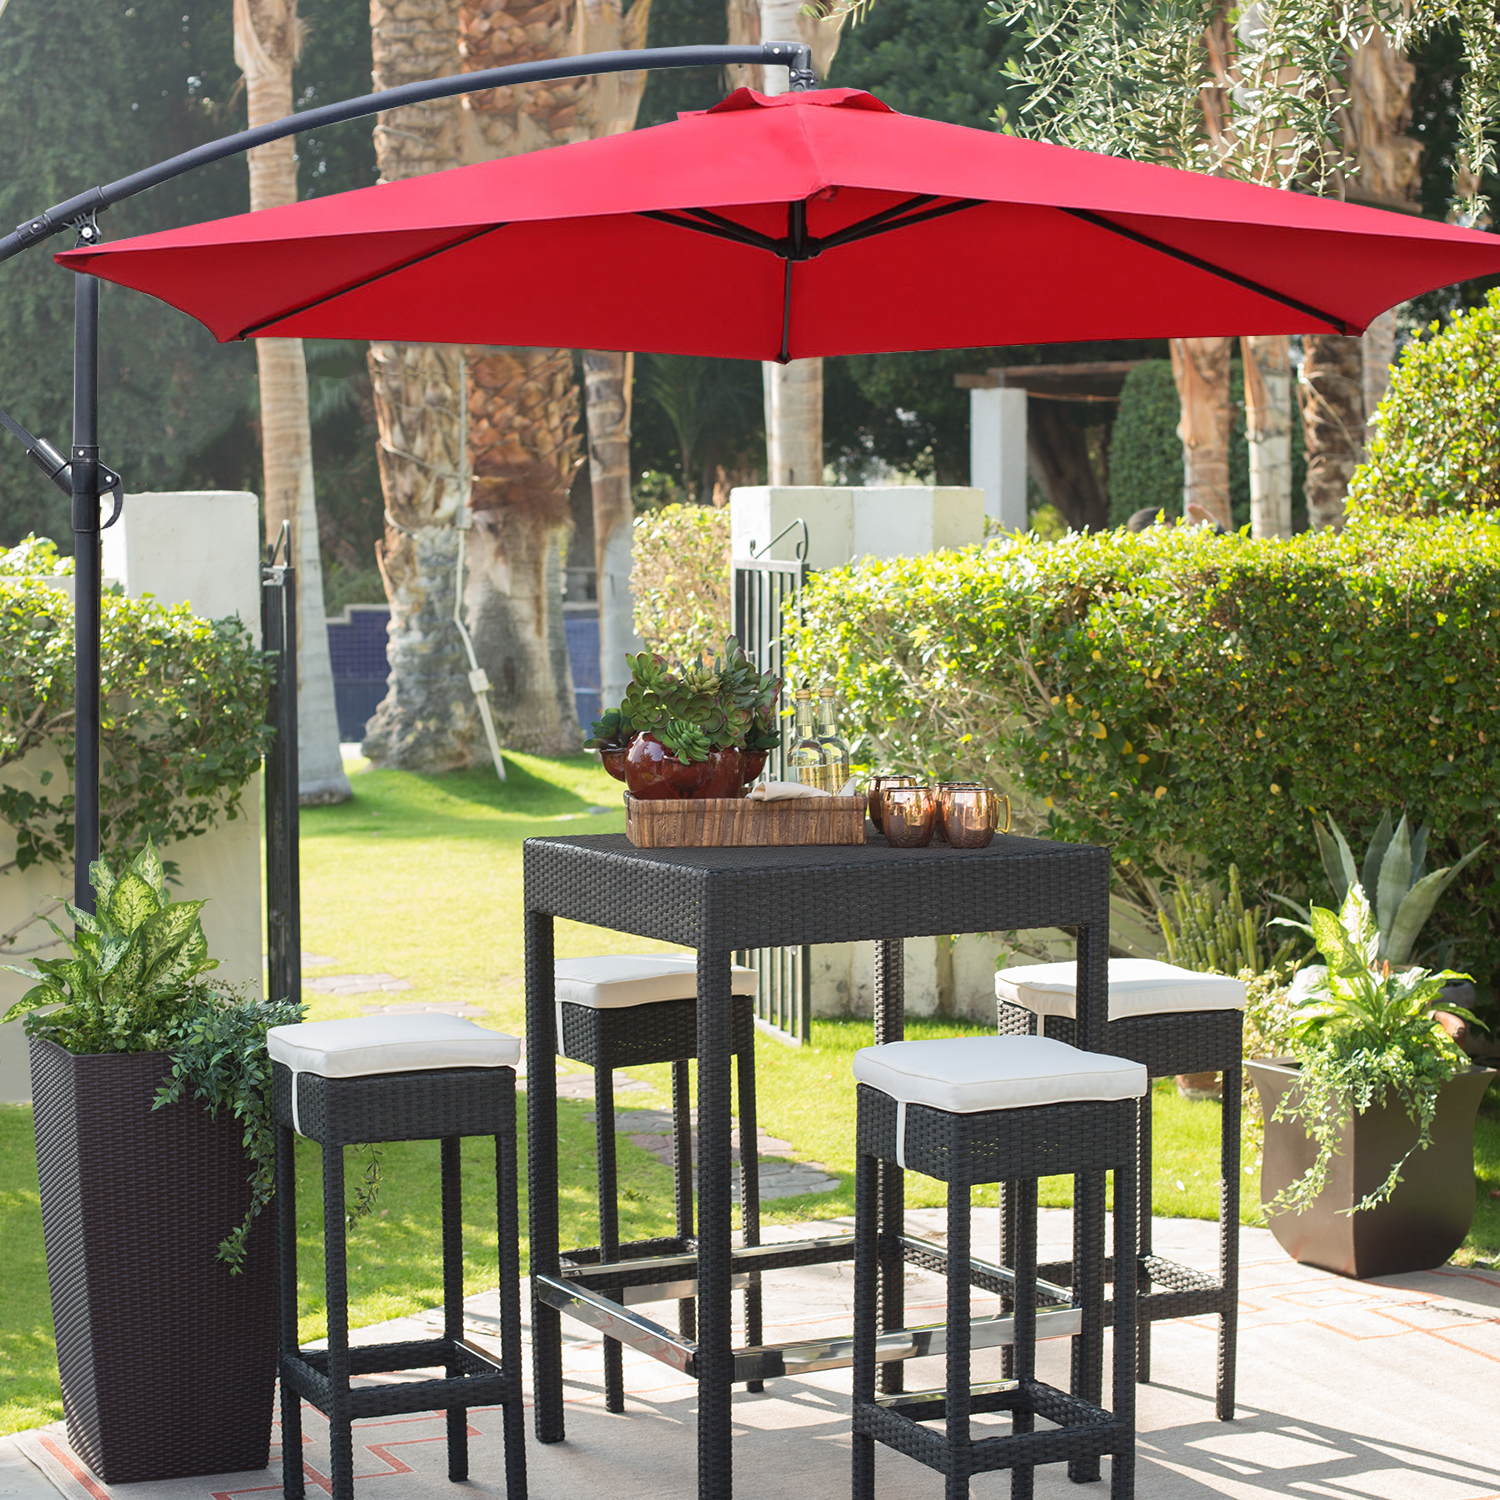 How to choose the right outdoor umbrella